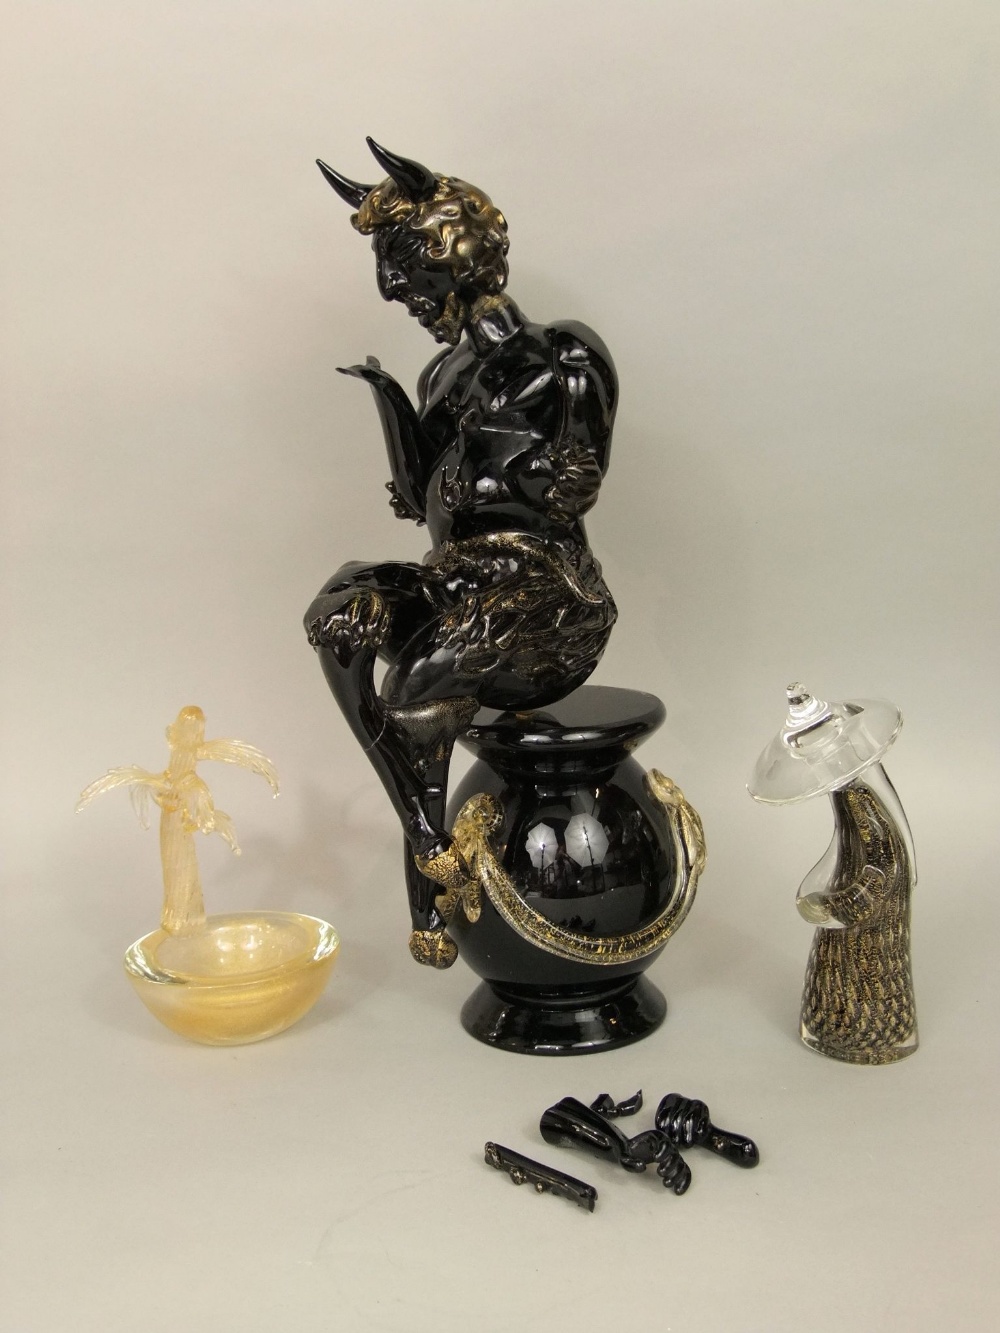 Unusual Murano glass character group in the form of a devilish faun character sat on a baluster - Image 2 of 2